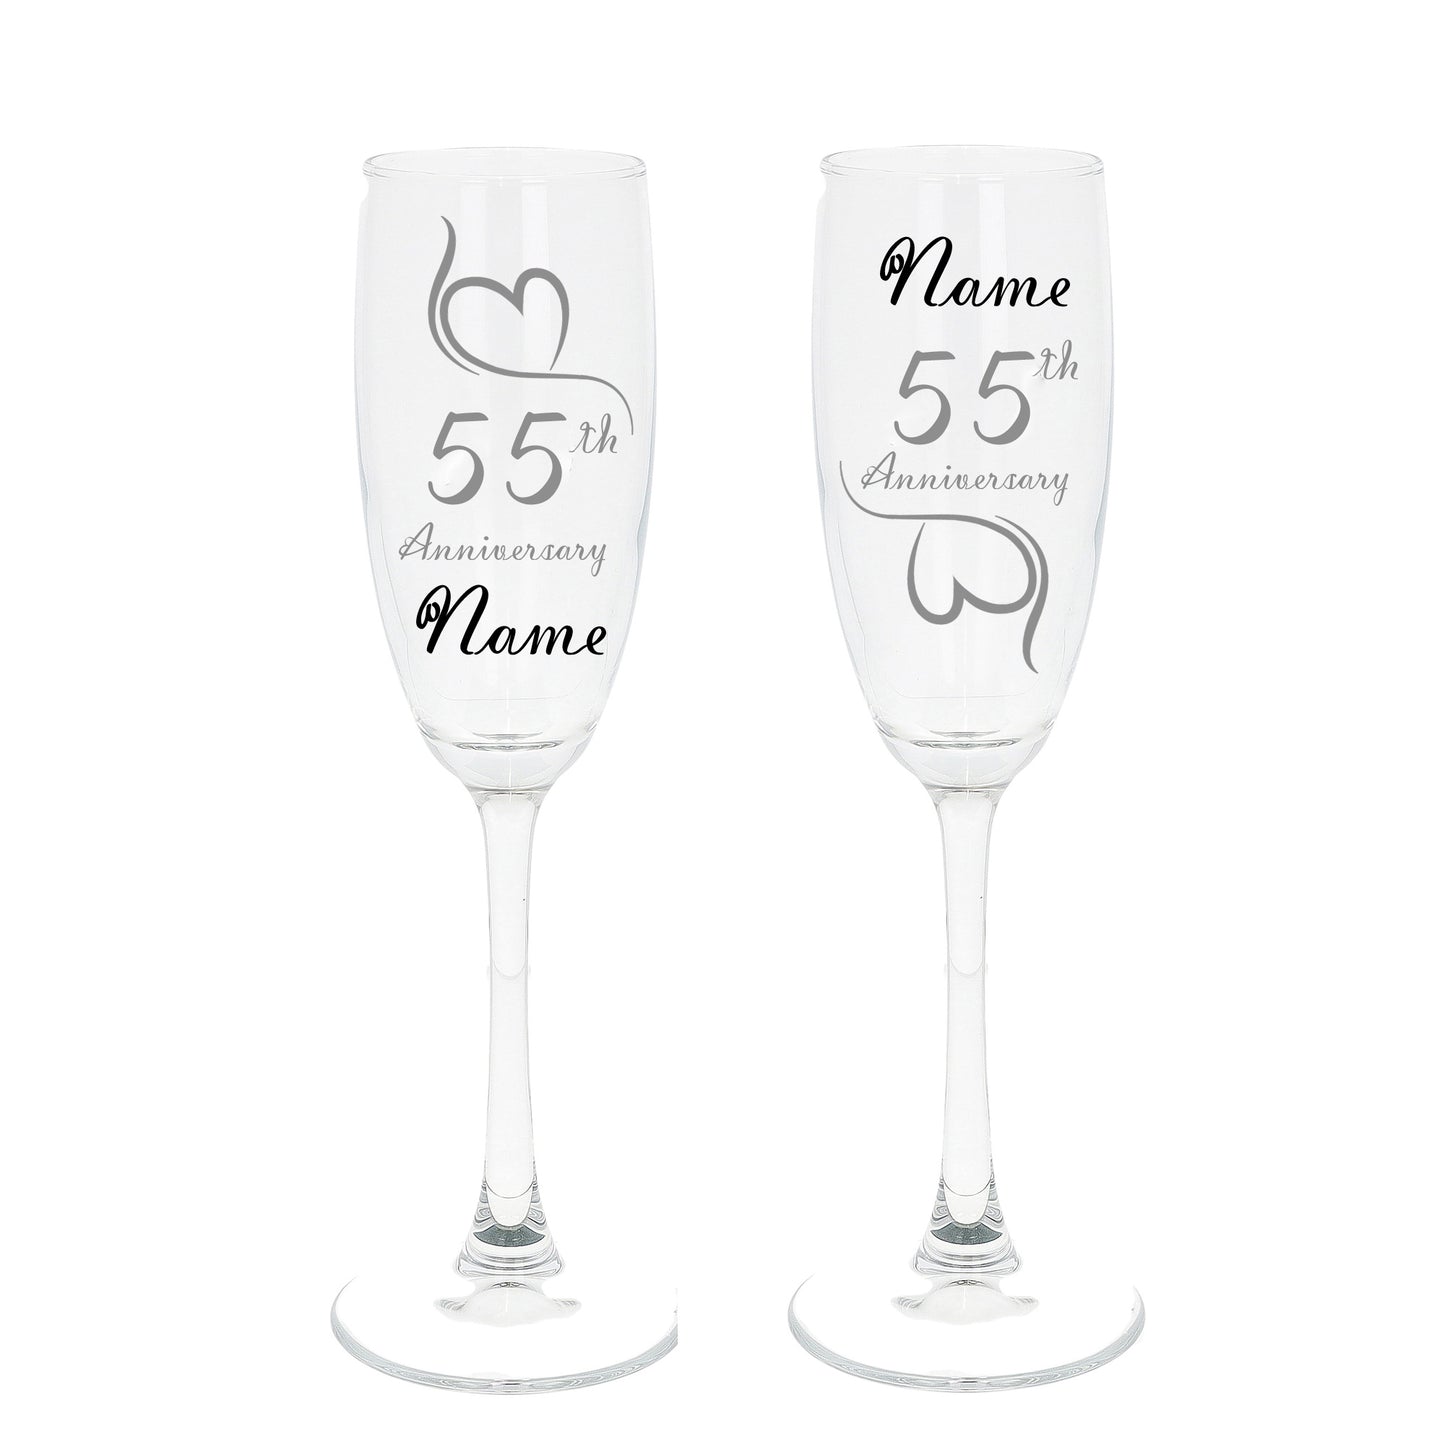 Engraved 55th Emerald Wedding Anniversary Personalised Engraved Champagne Glass Gift Set  - Always Looking Good -   